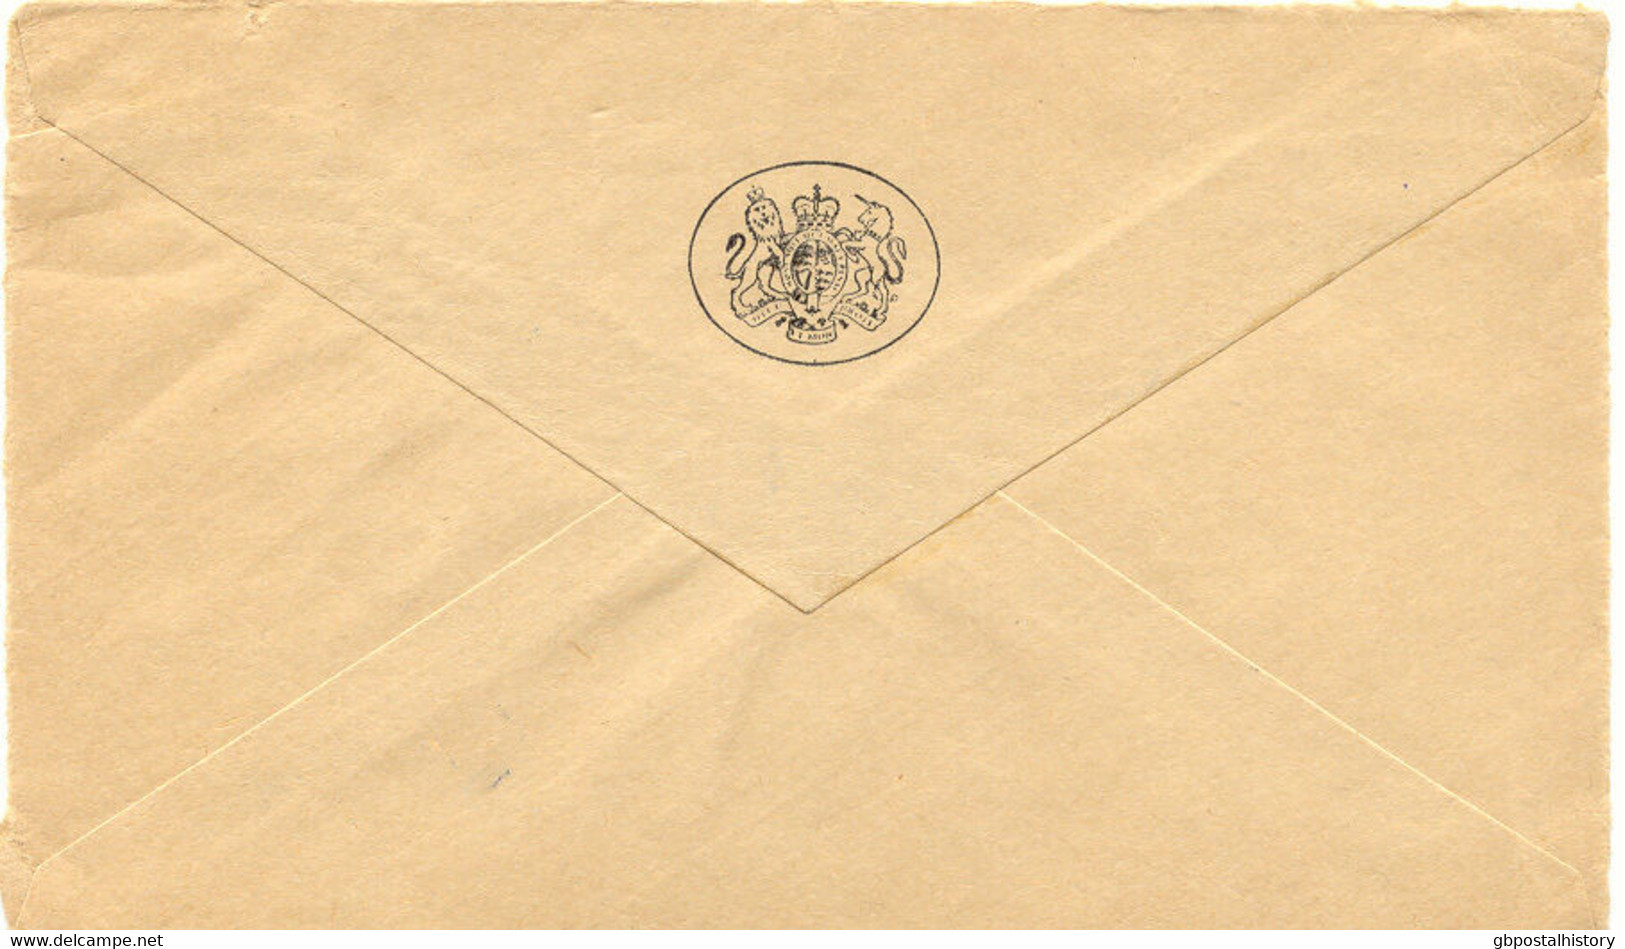 GAMBIA "OFFICIAL PAID - 4 JU 64 - BATHURST GAMBIA" Red Oval Postmark Superb OHMS - Gambie (1965-...)